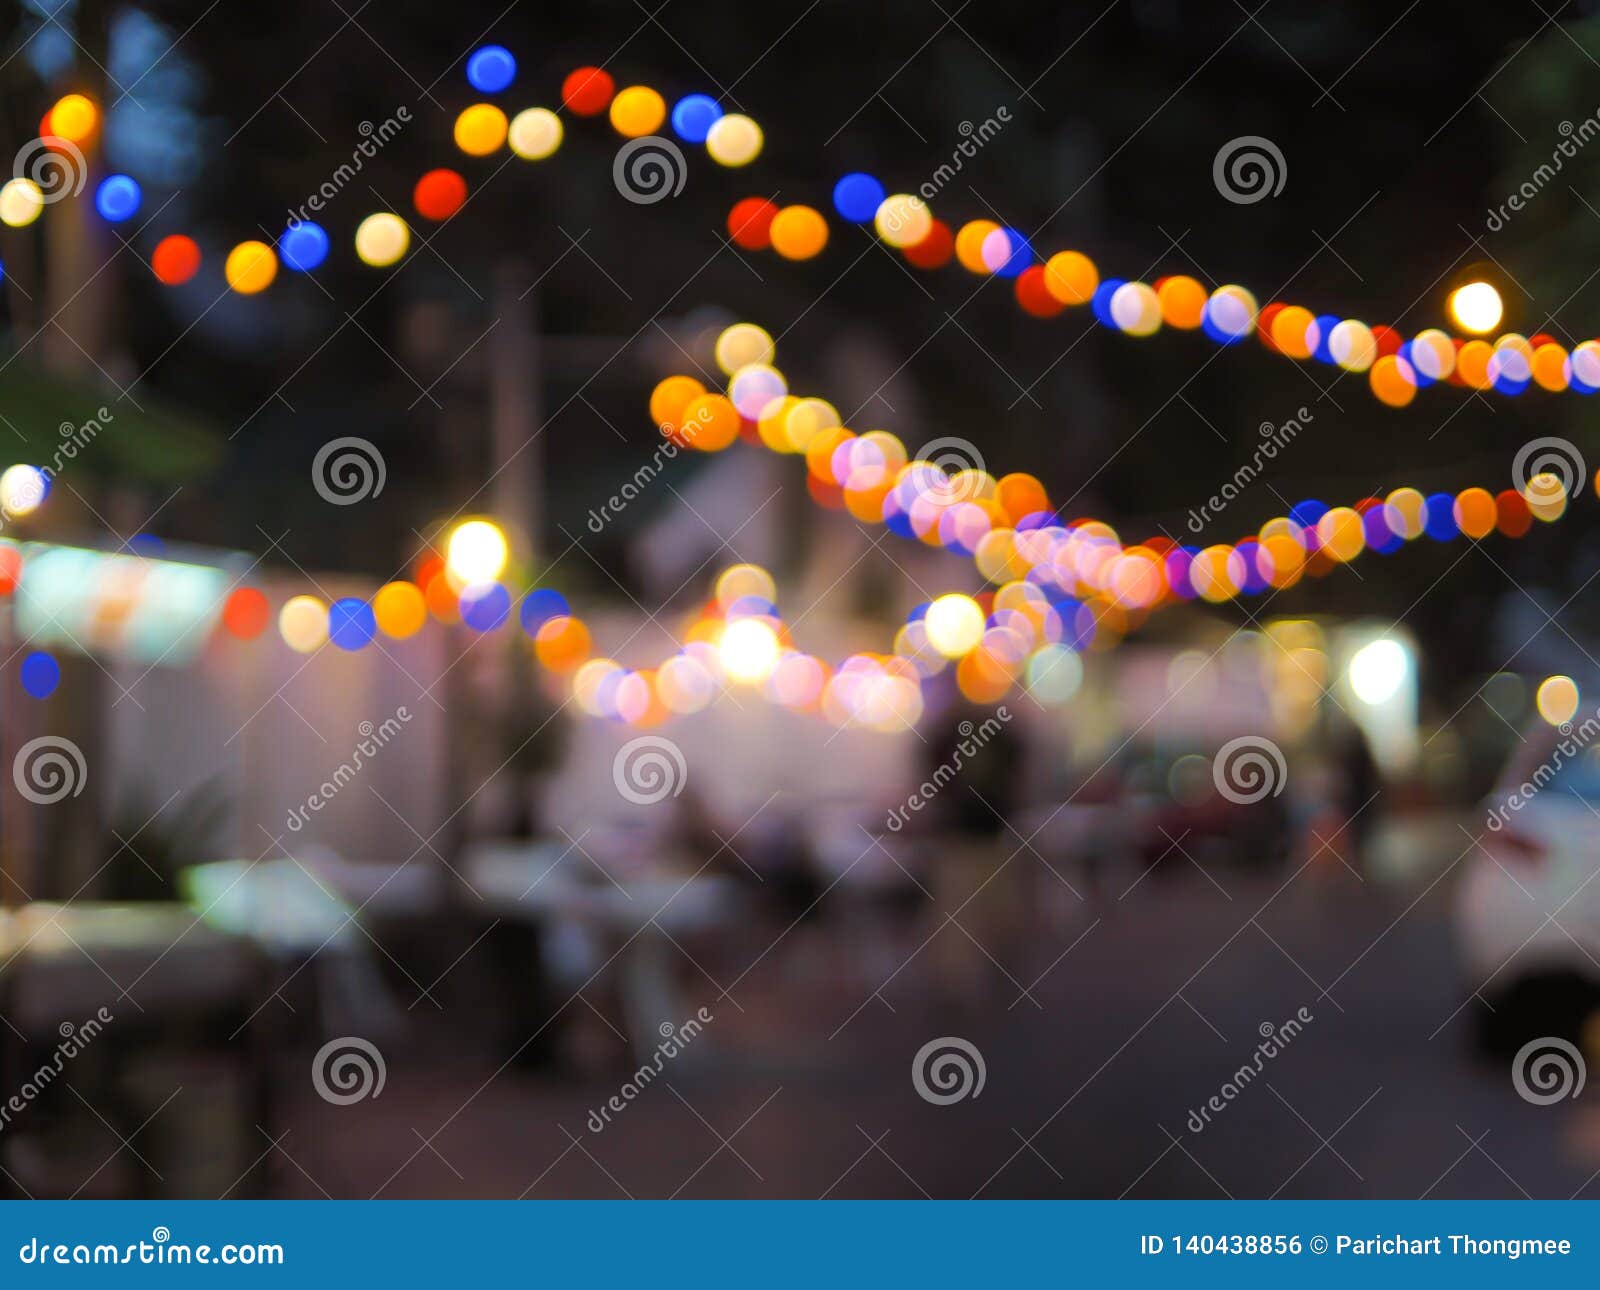 Vintage Tone Colorful of Light Abstract Blur Image of Night Festival on ...